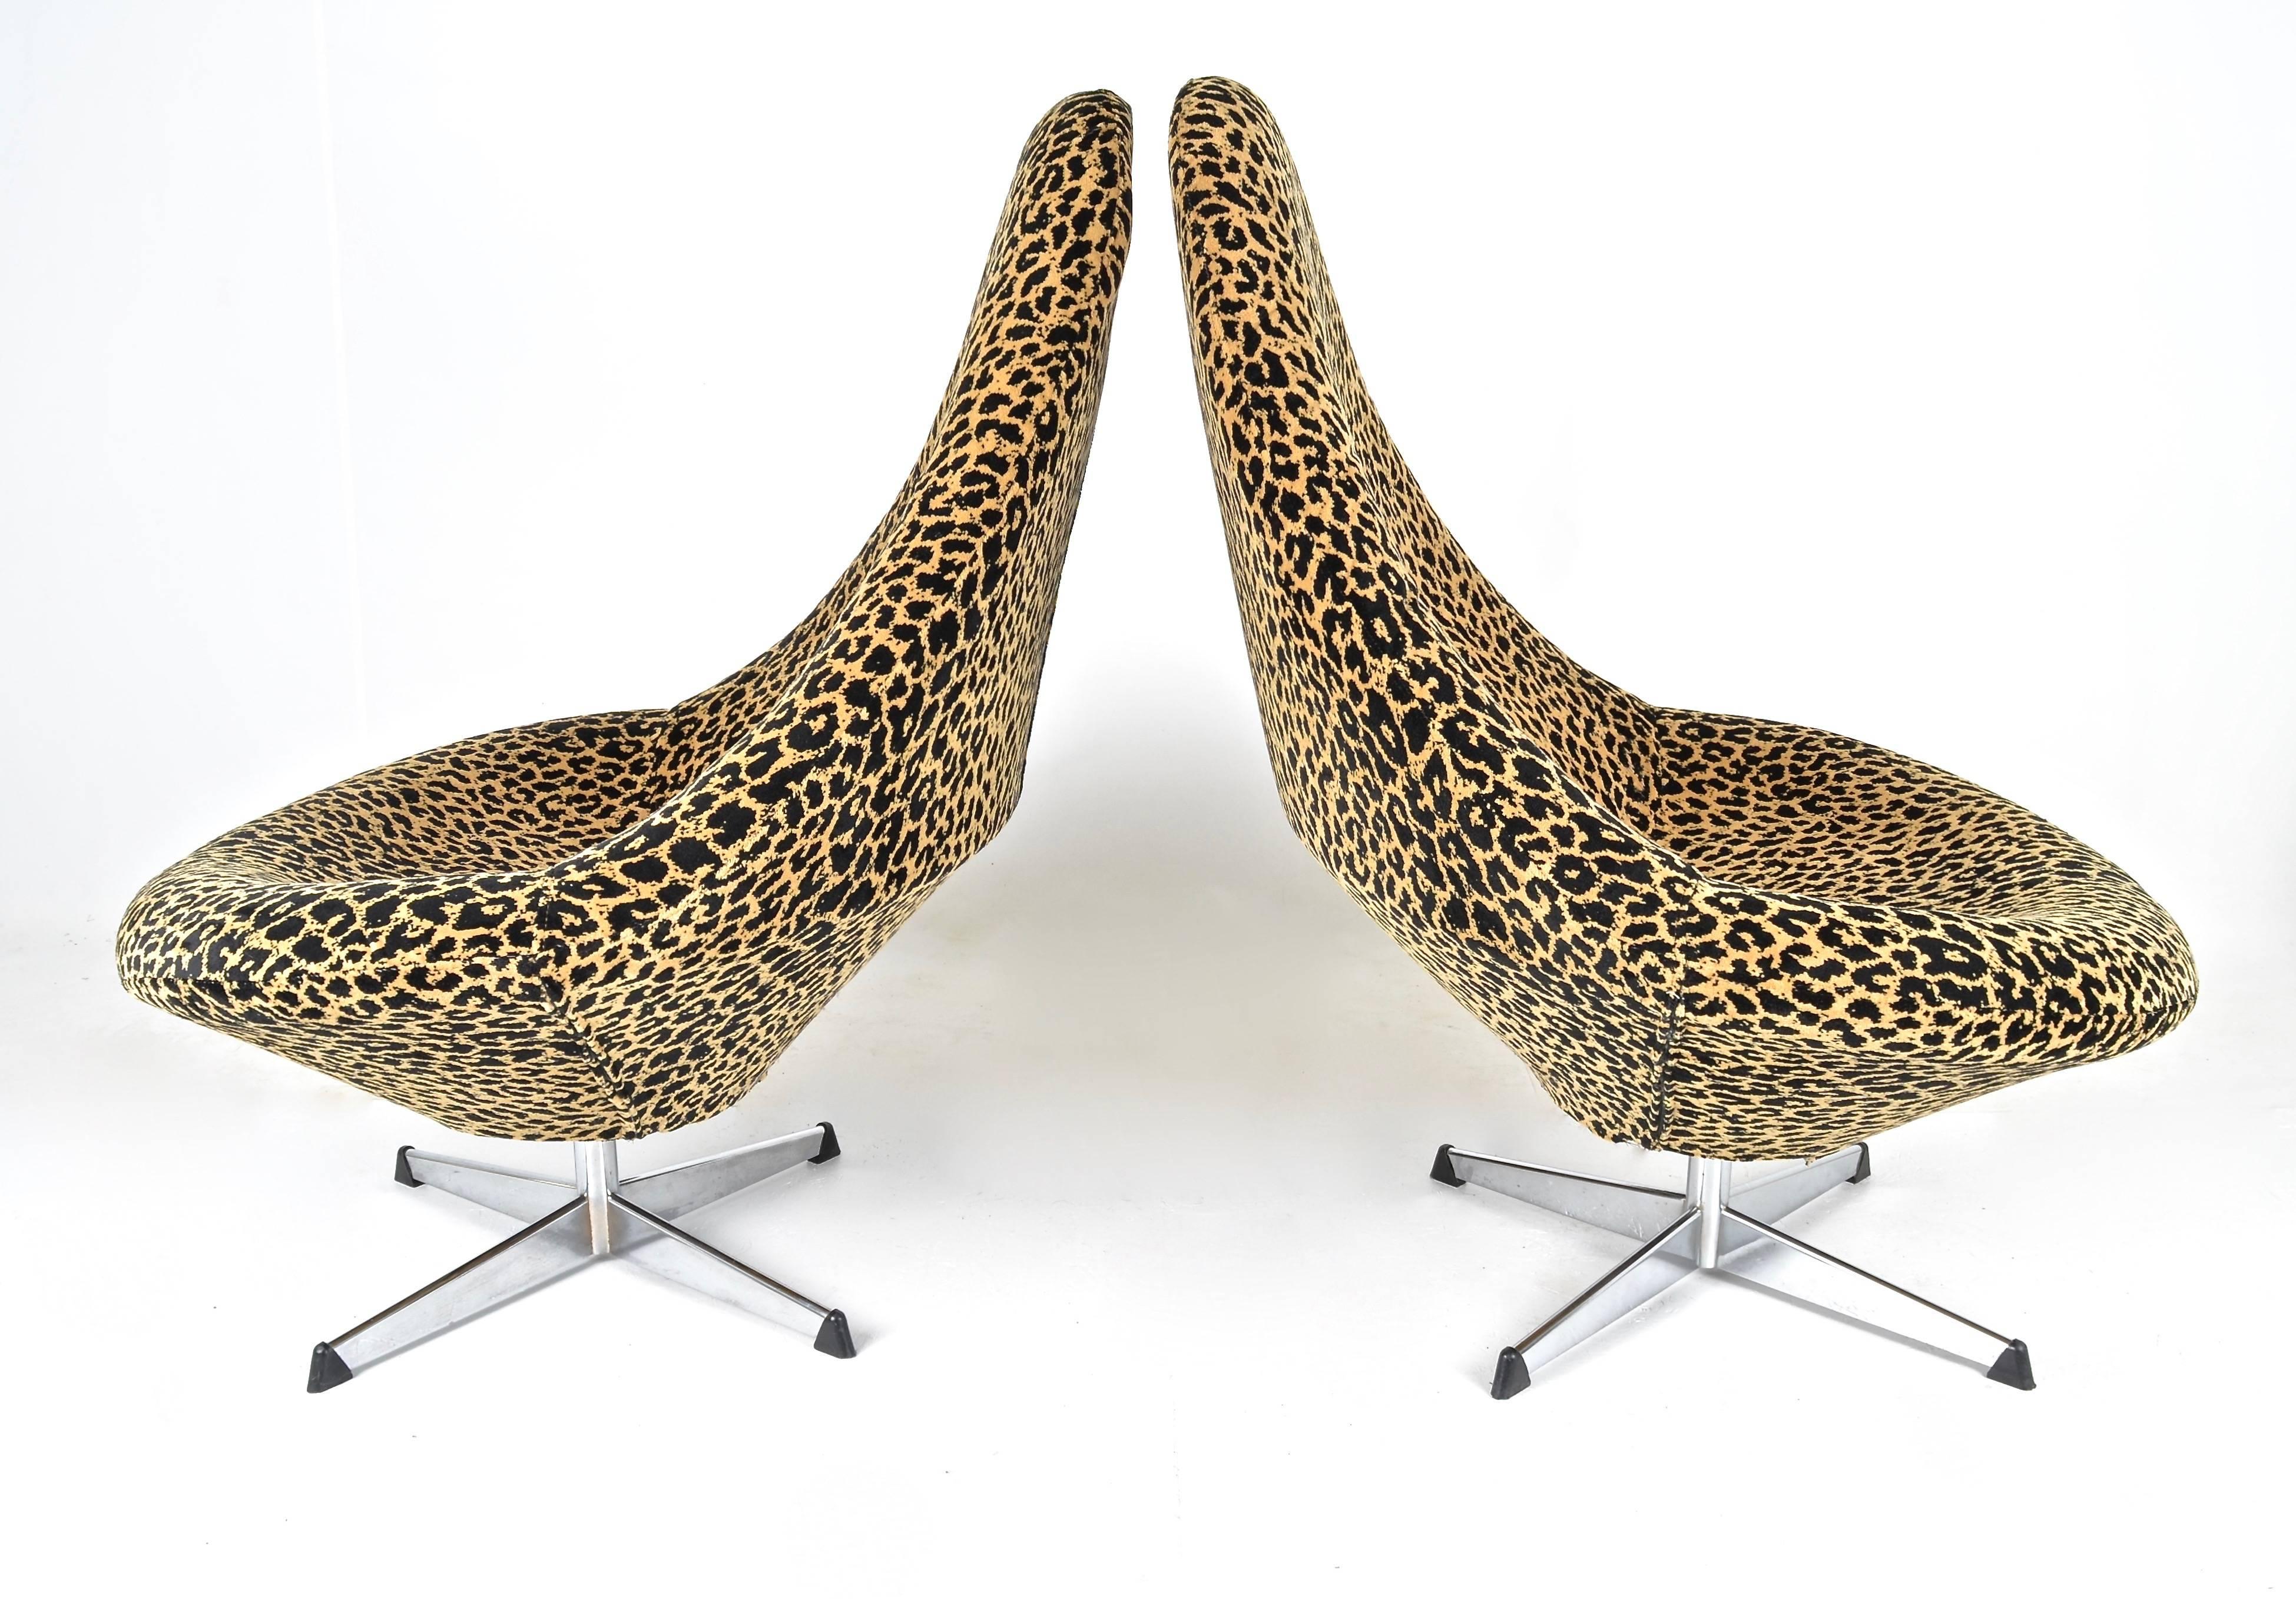 Newly upholstered in quality leopard print jacquard, a sleek and very comfortable pair of vintage swivel chairs. Nice size. Simple steel bases.